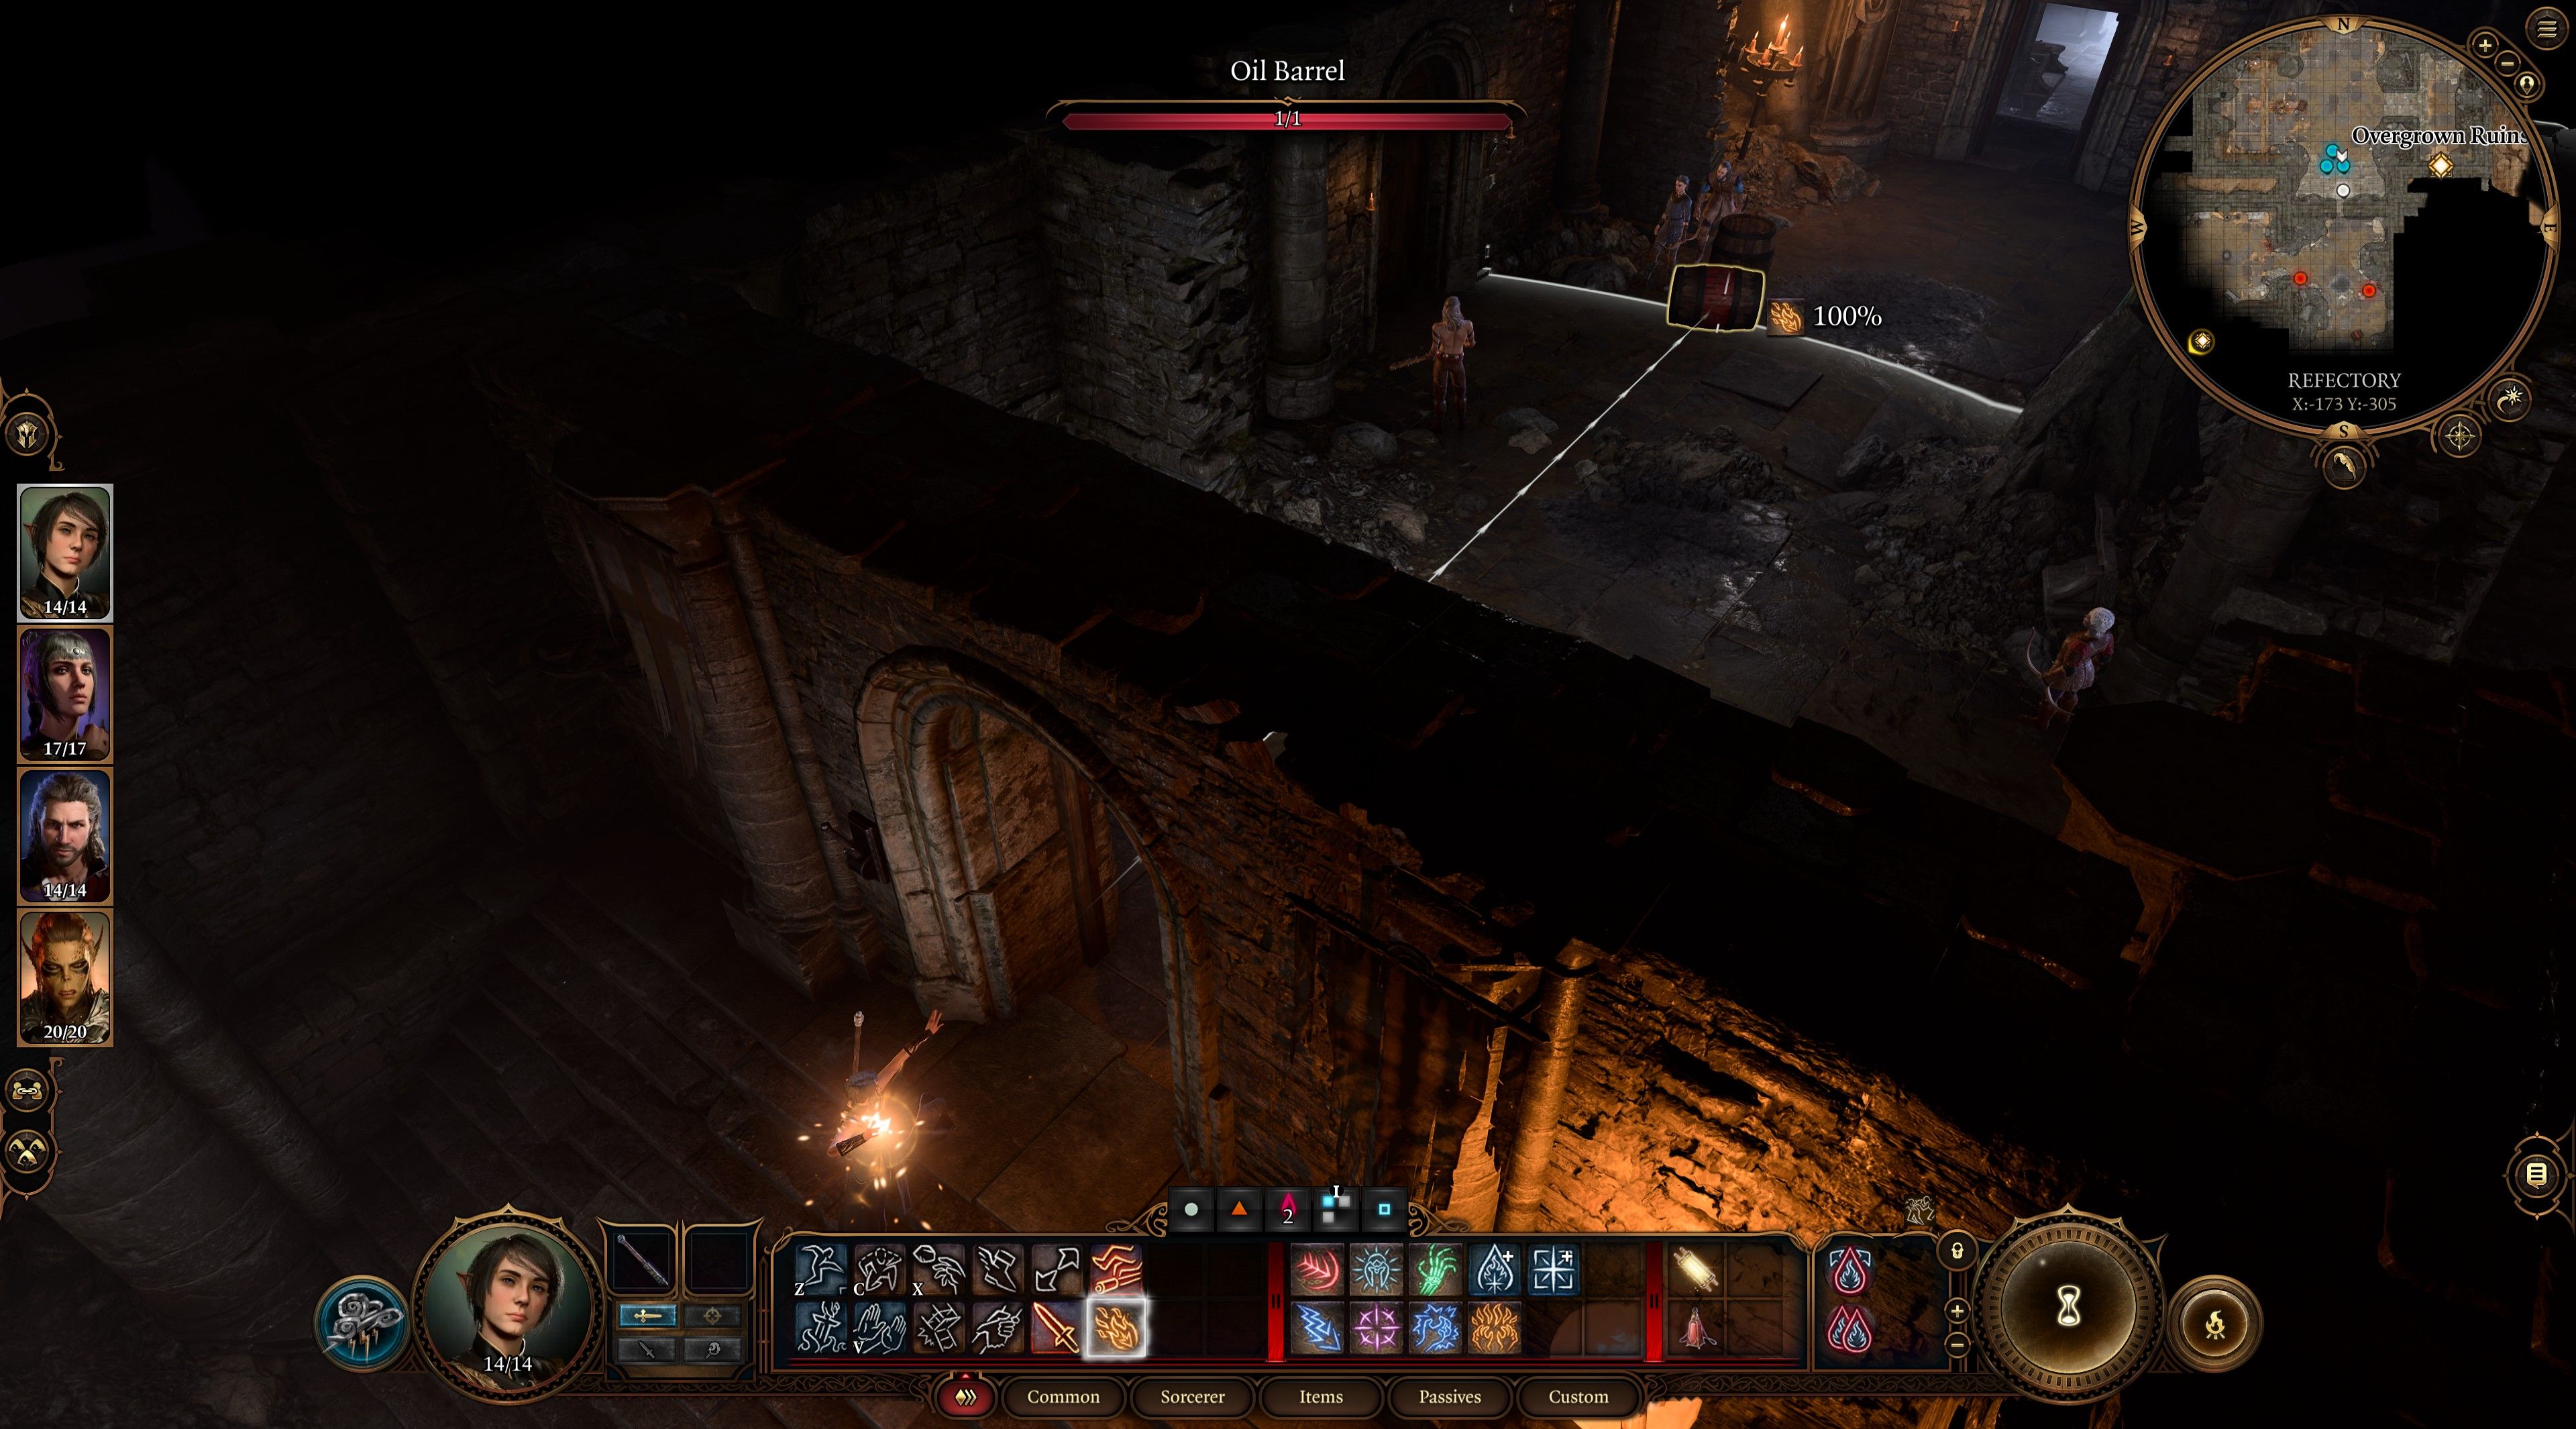 Baldur's Gate 3 Player Preparing To Ignite Oil Barrel With Fire Spell To Blast Group Of Bandits